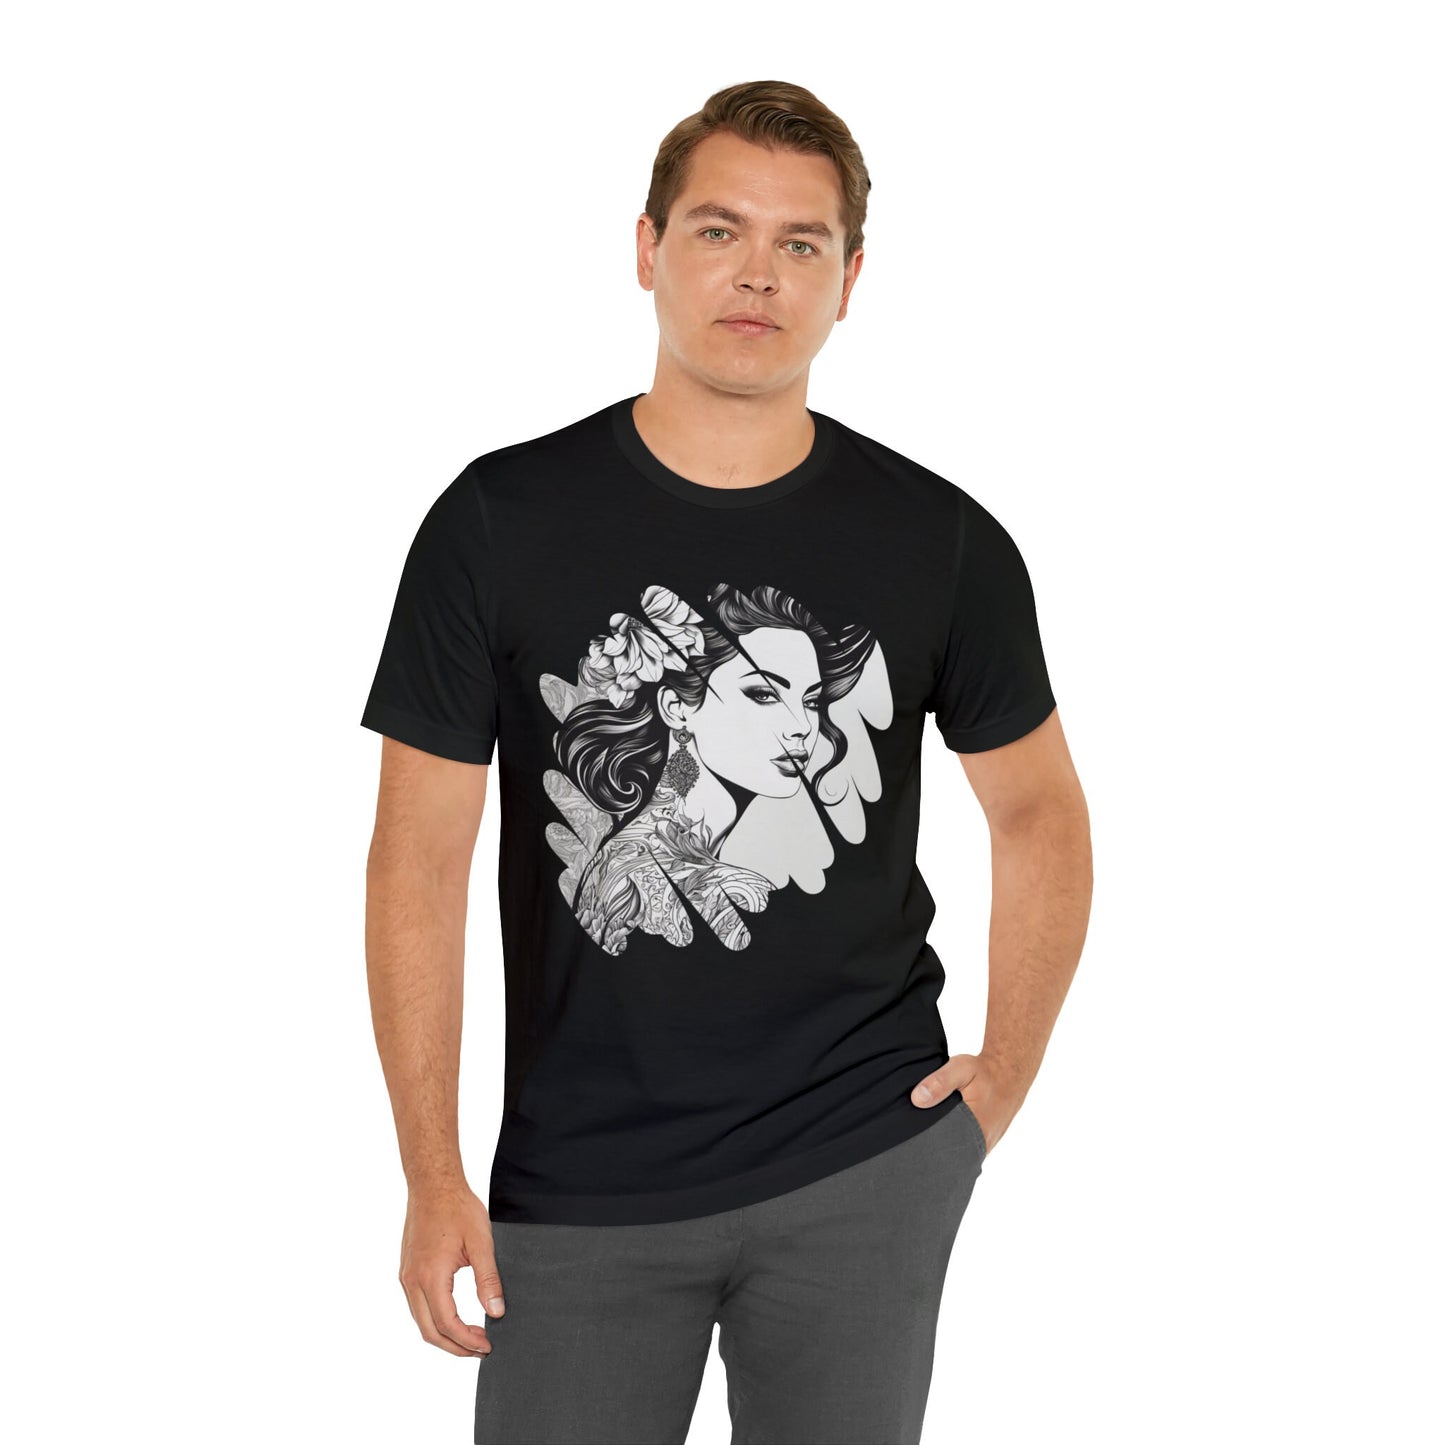 Solana Pin-Up Girl Short Sleeve Tee Perfect Gift for Men and Women